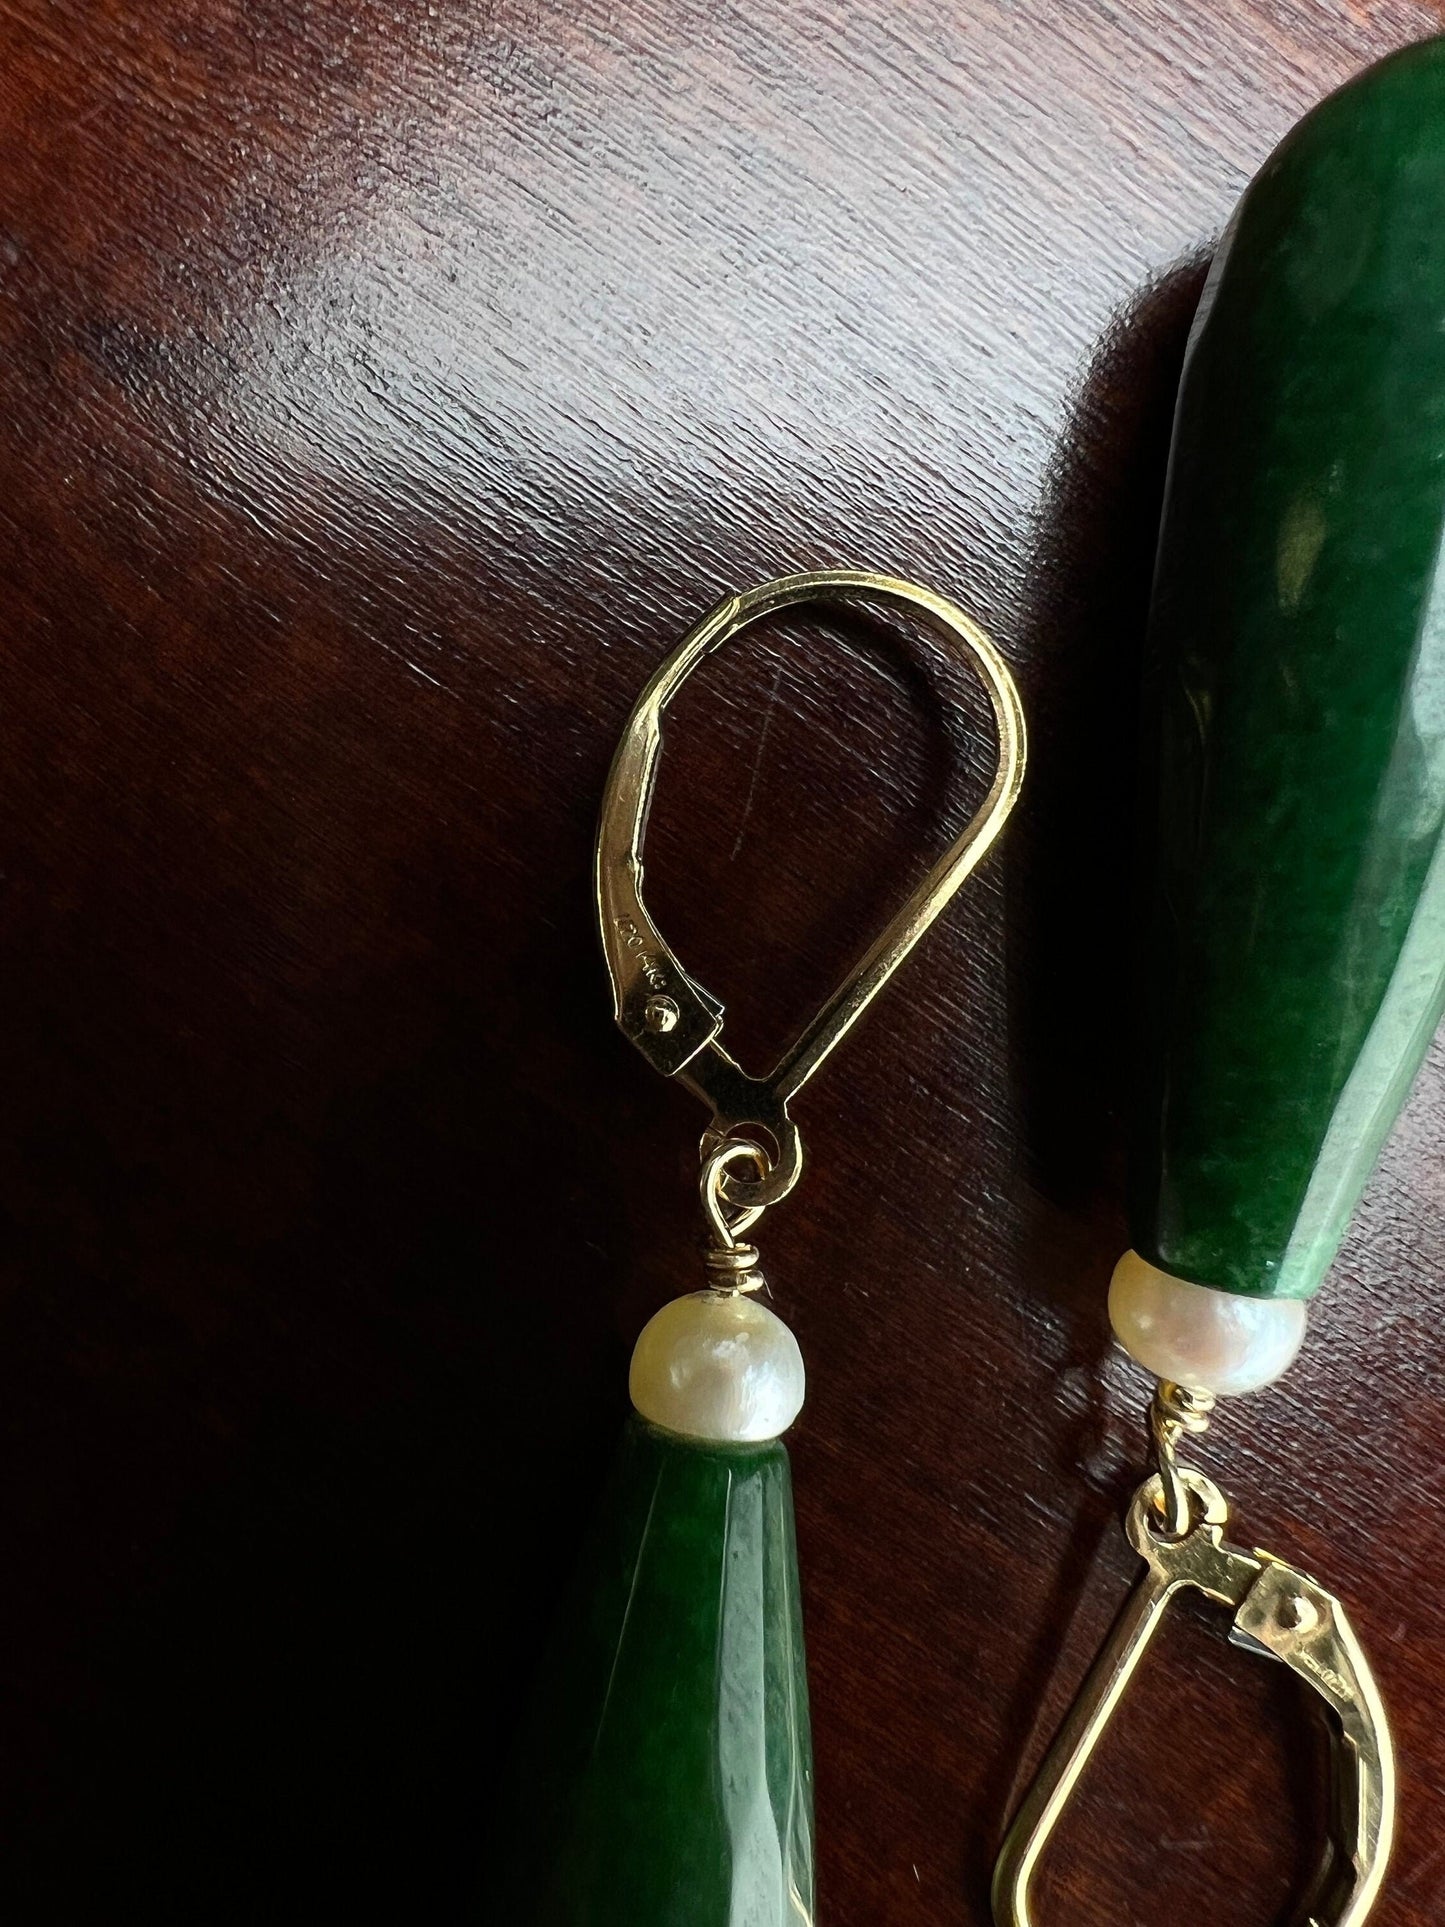 Emerald Jade 10×30mm Long Teardrop with Freshwater Button Pearl, 925 Sterling Silver or 14K Gold Filled Leverback Earrings Set, Gift